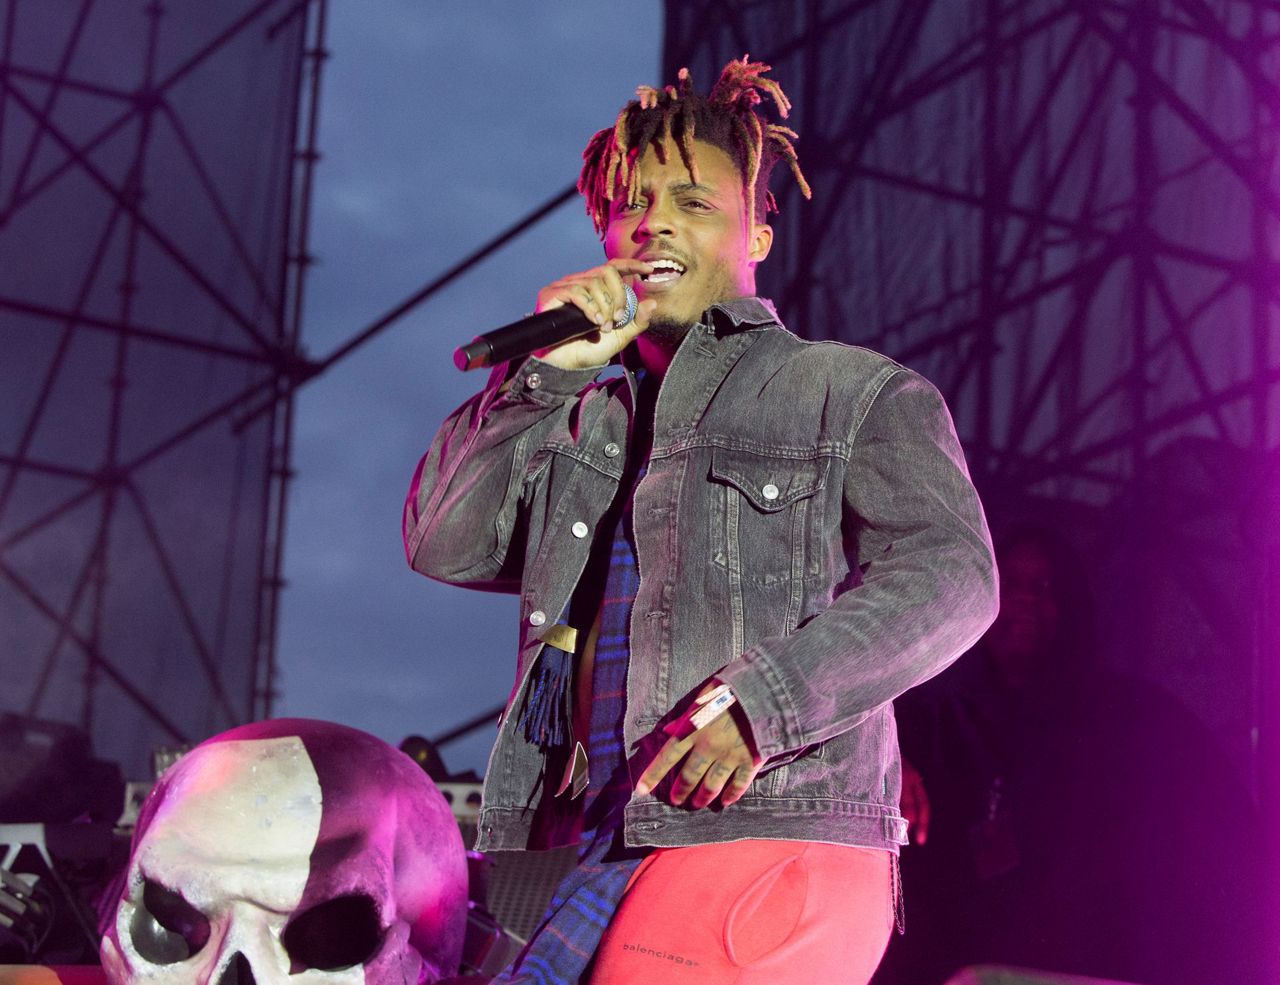 2 guards with rapper Juice WRLD arrested on gun charges